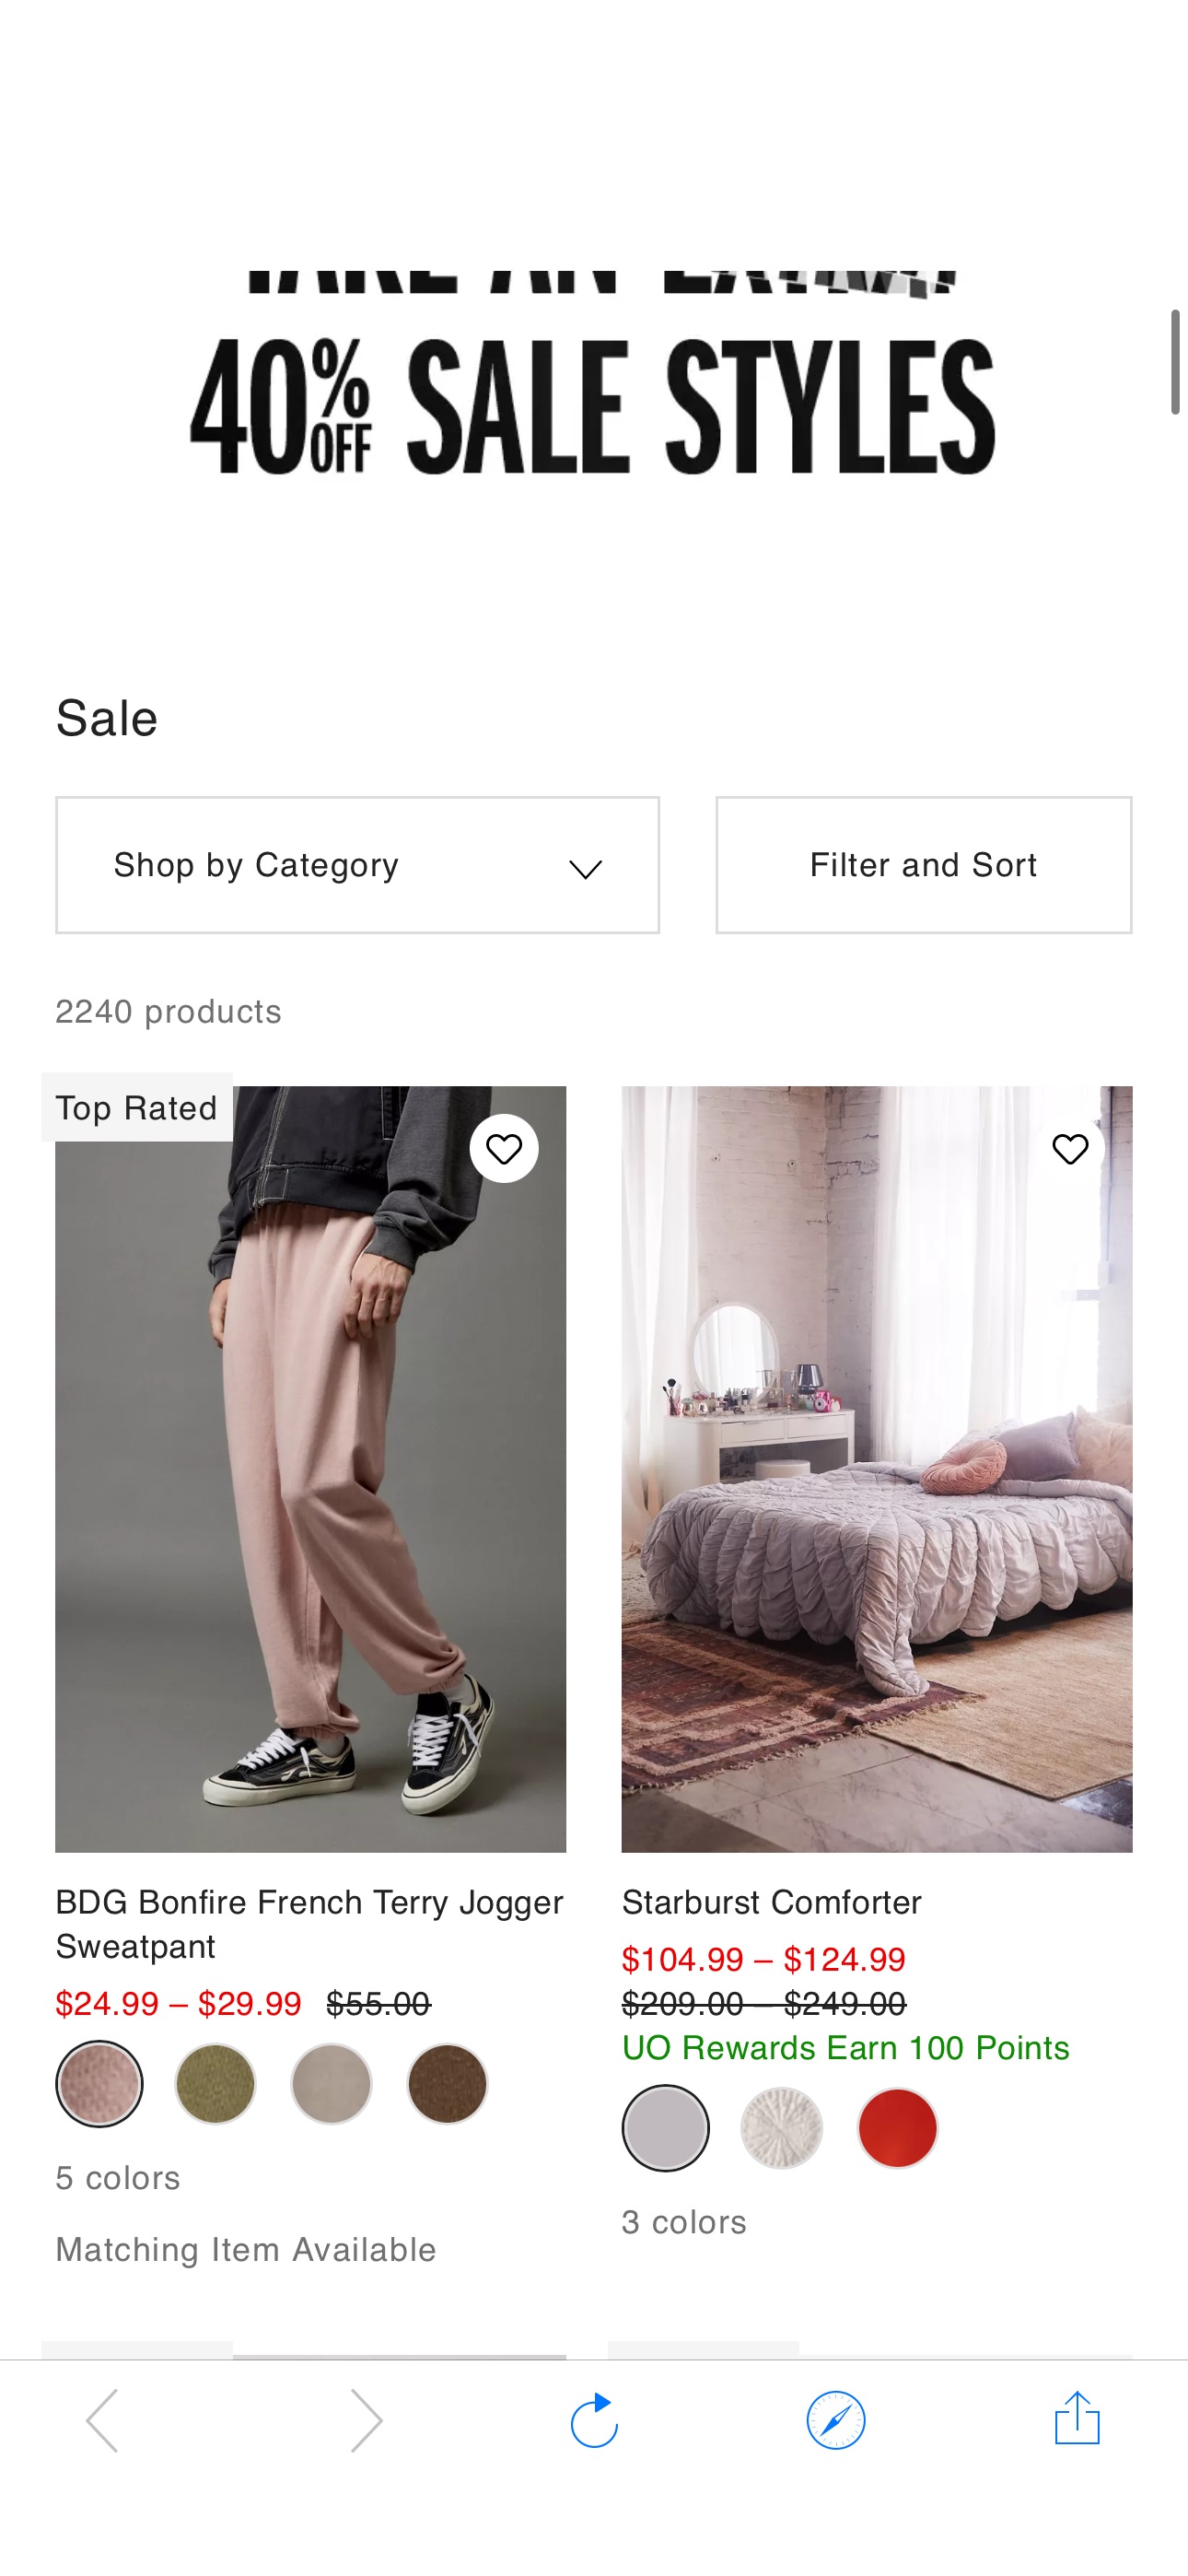 Sale | Urban Outfitters | Urban Outfitters Urban Outfitters Up to 90% off
Add to cart for discount